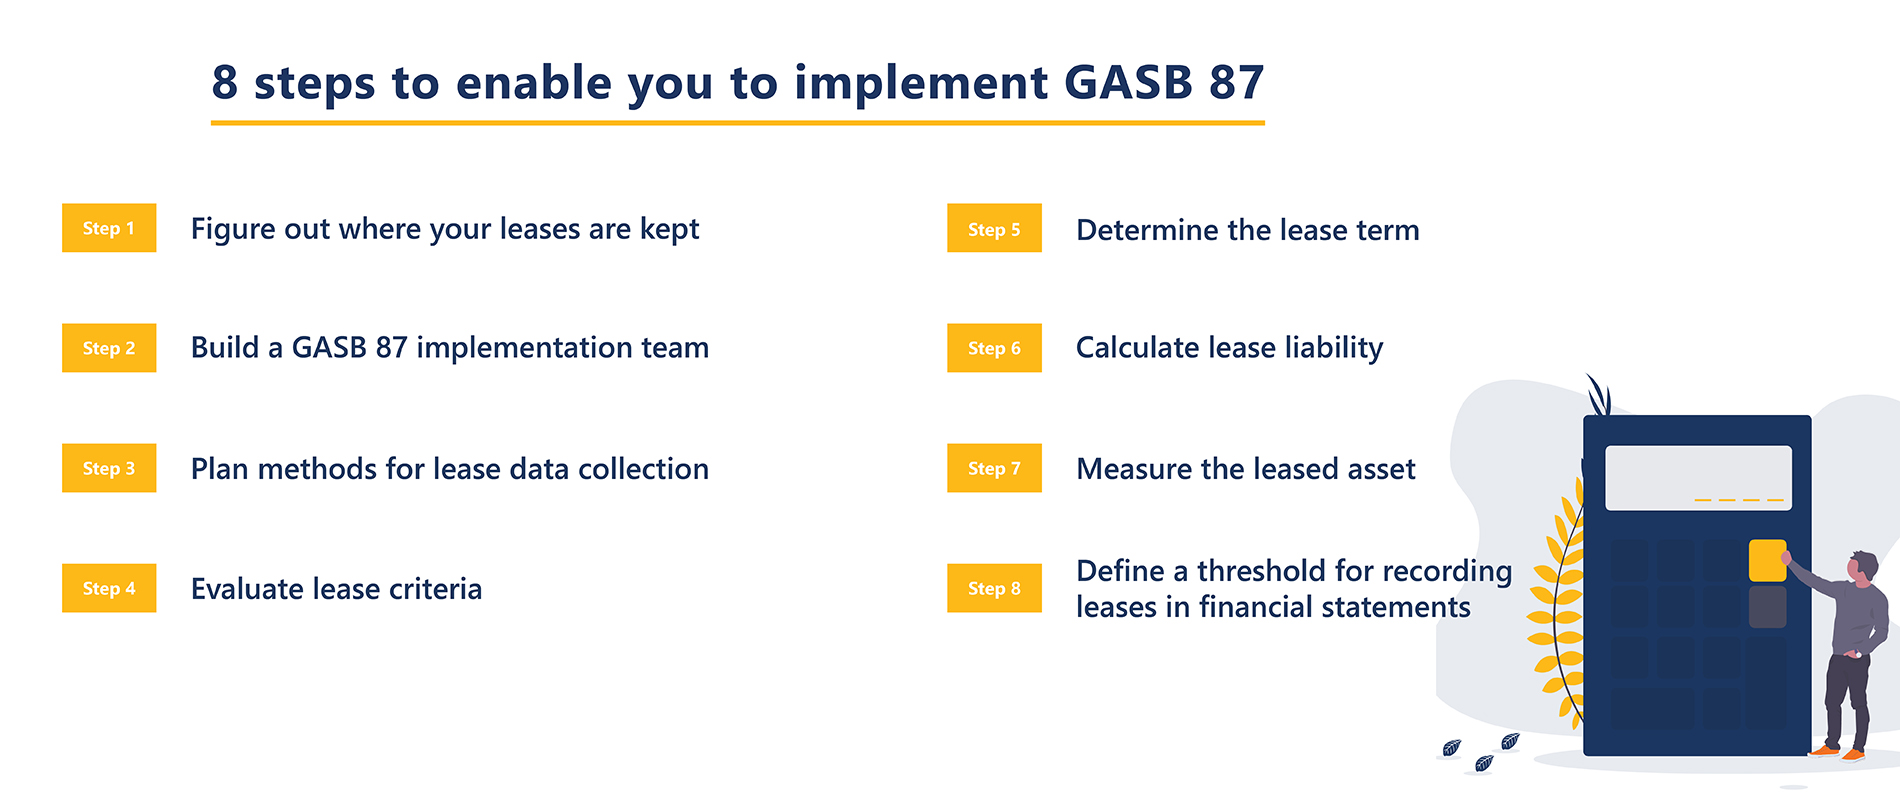 8 steps to enable you to implement GASB 87 